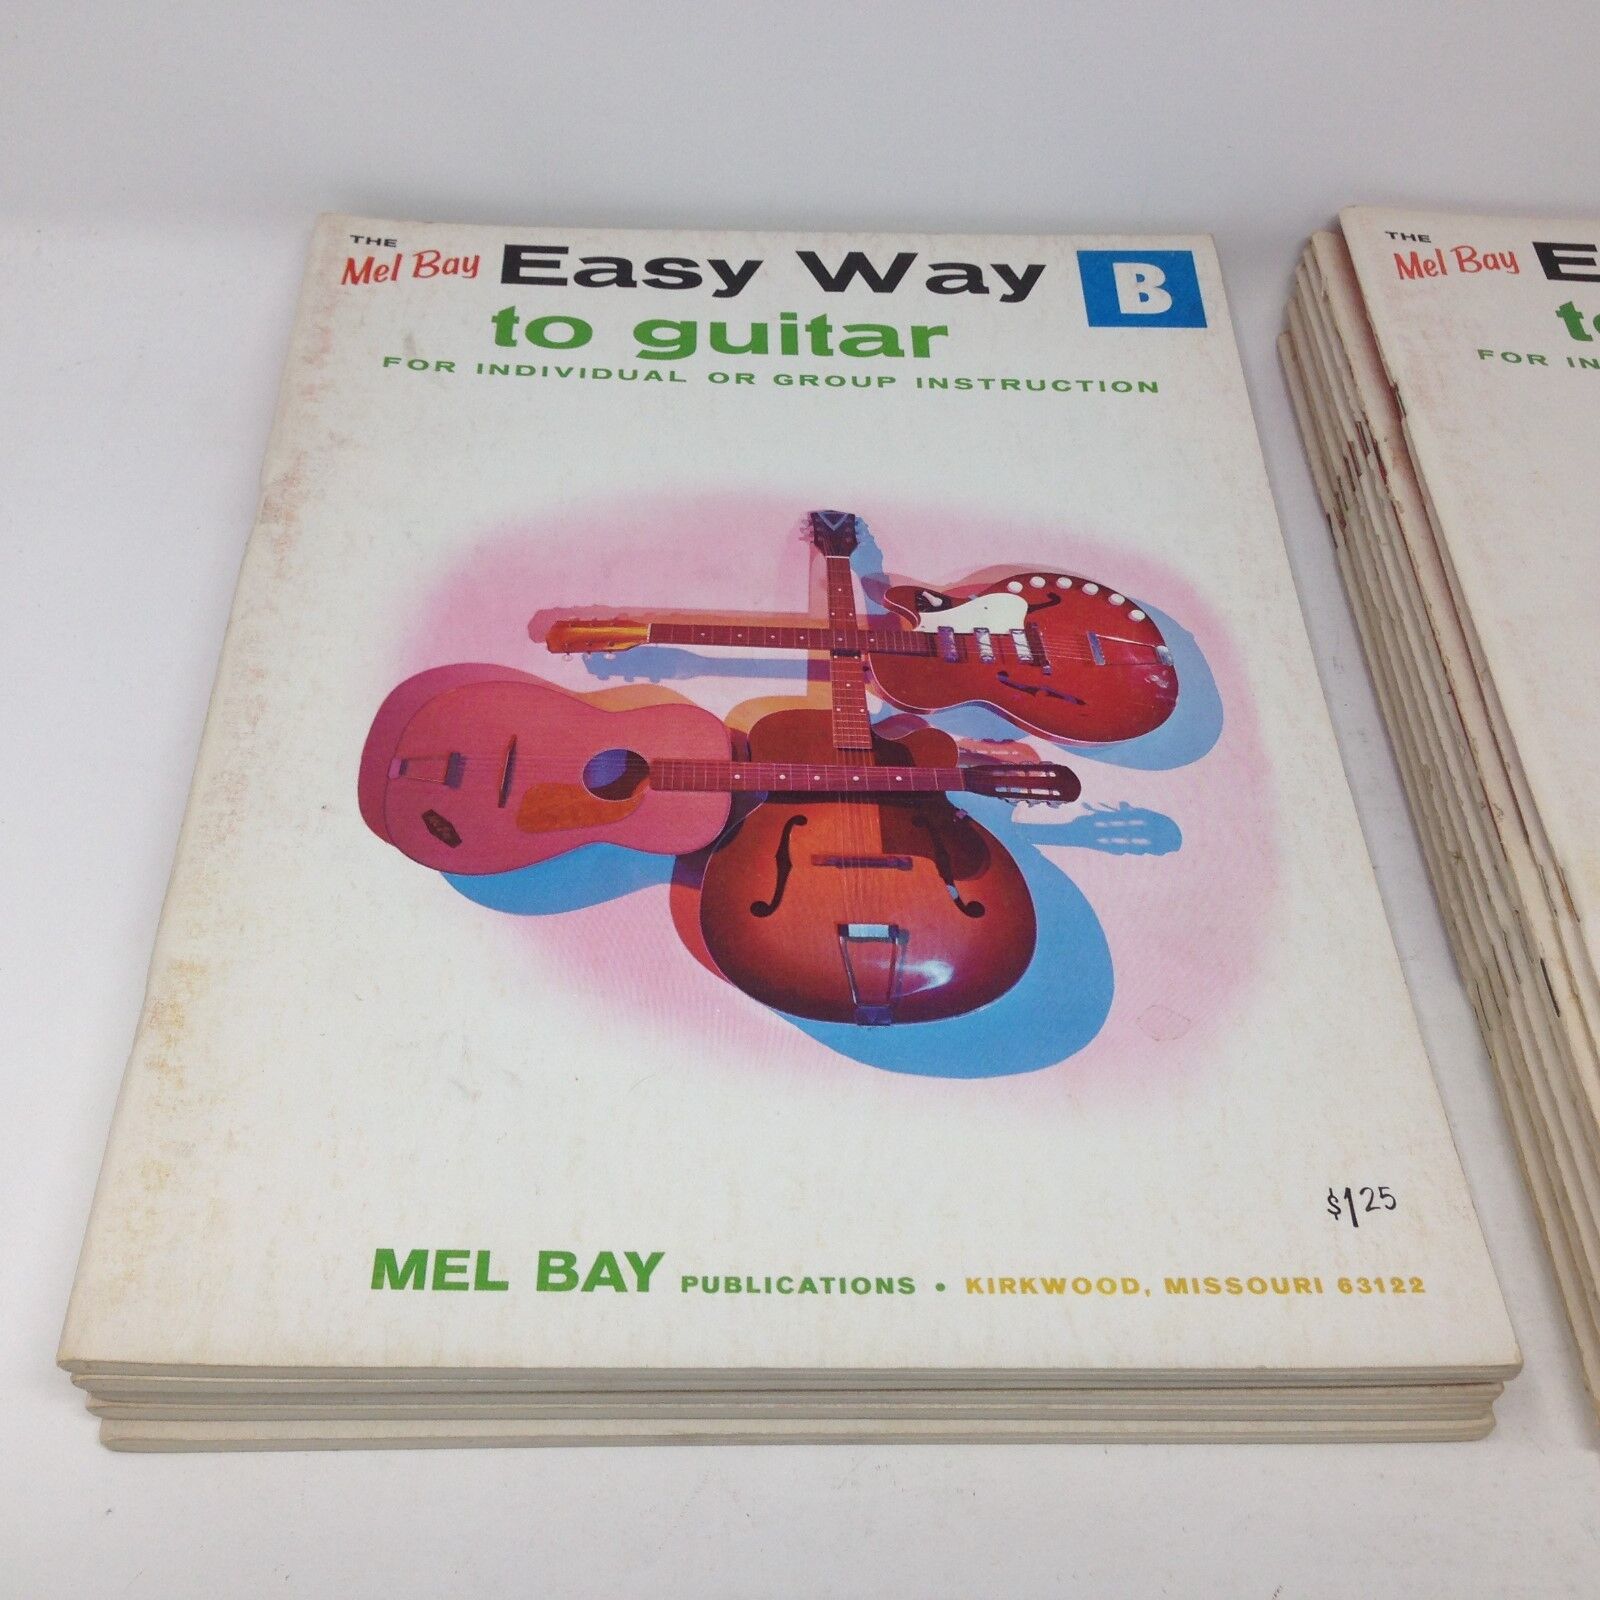 Vintage 1965 MEL BAY Easy Way to Guitar: Lot of one B booklets + one C booklets Без бренда - фотография #2